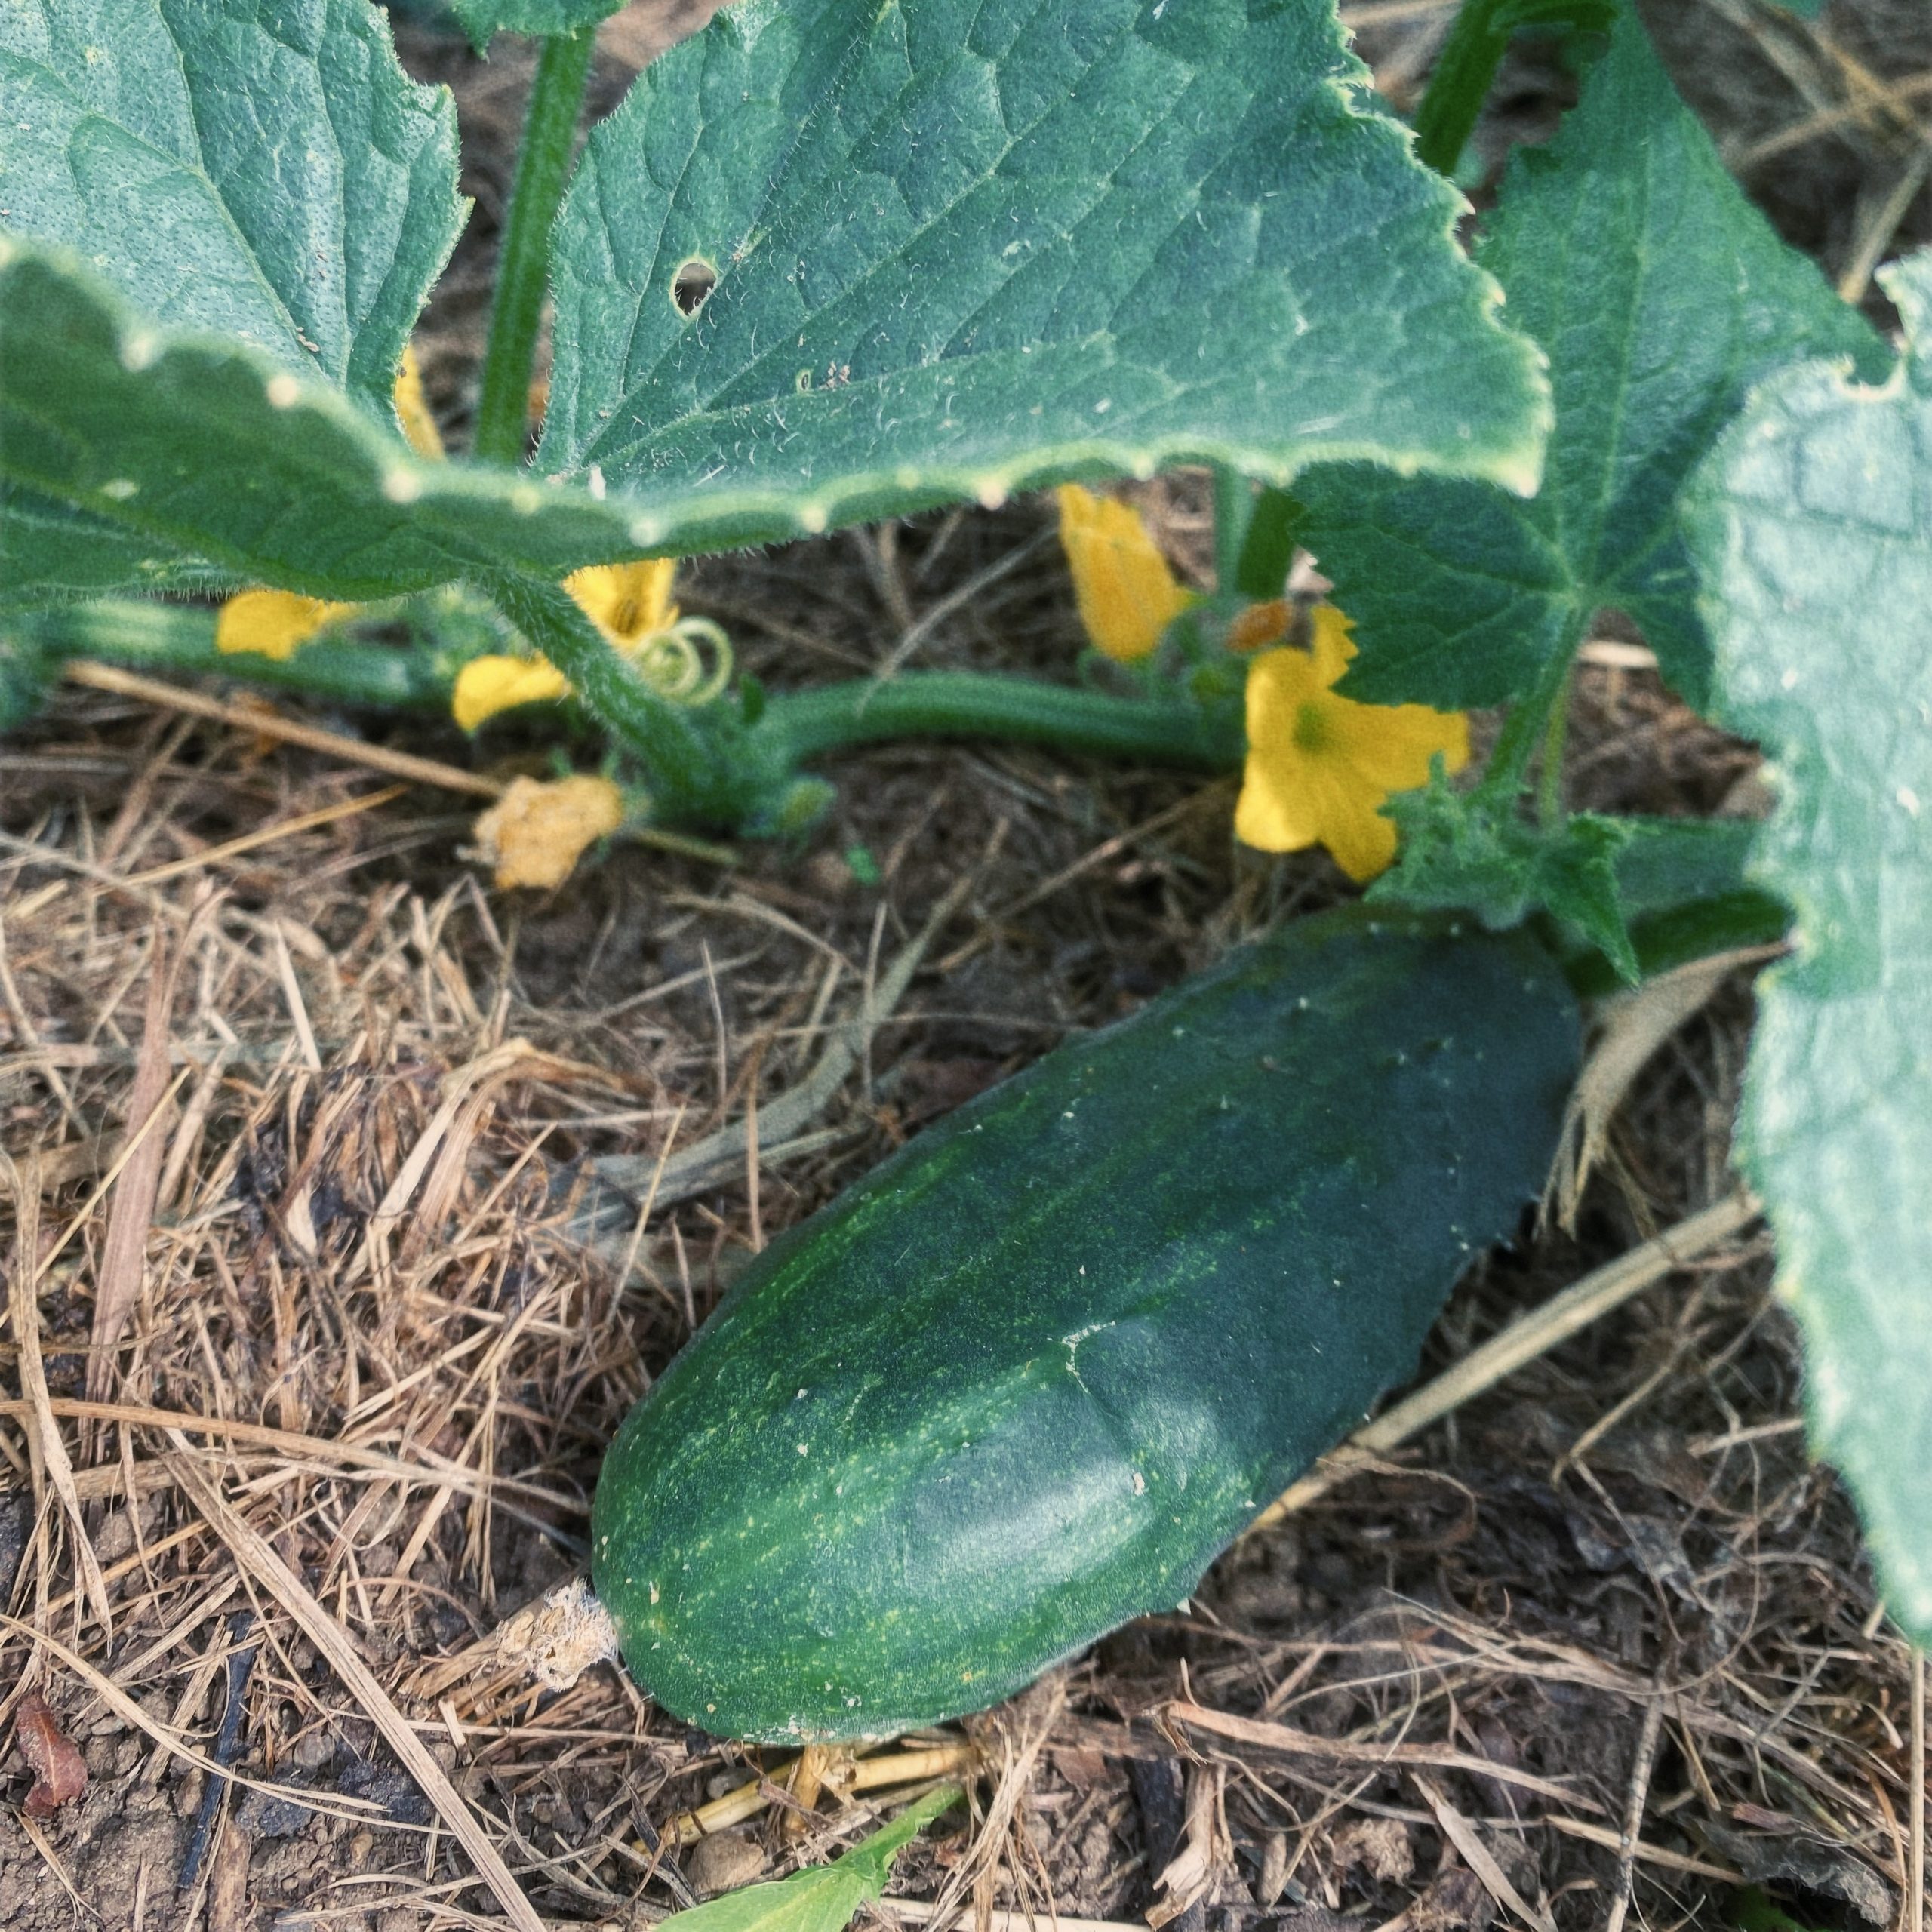 A Sky Meadow cucumber waiting to be picked